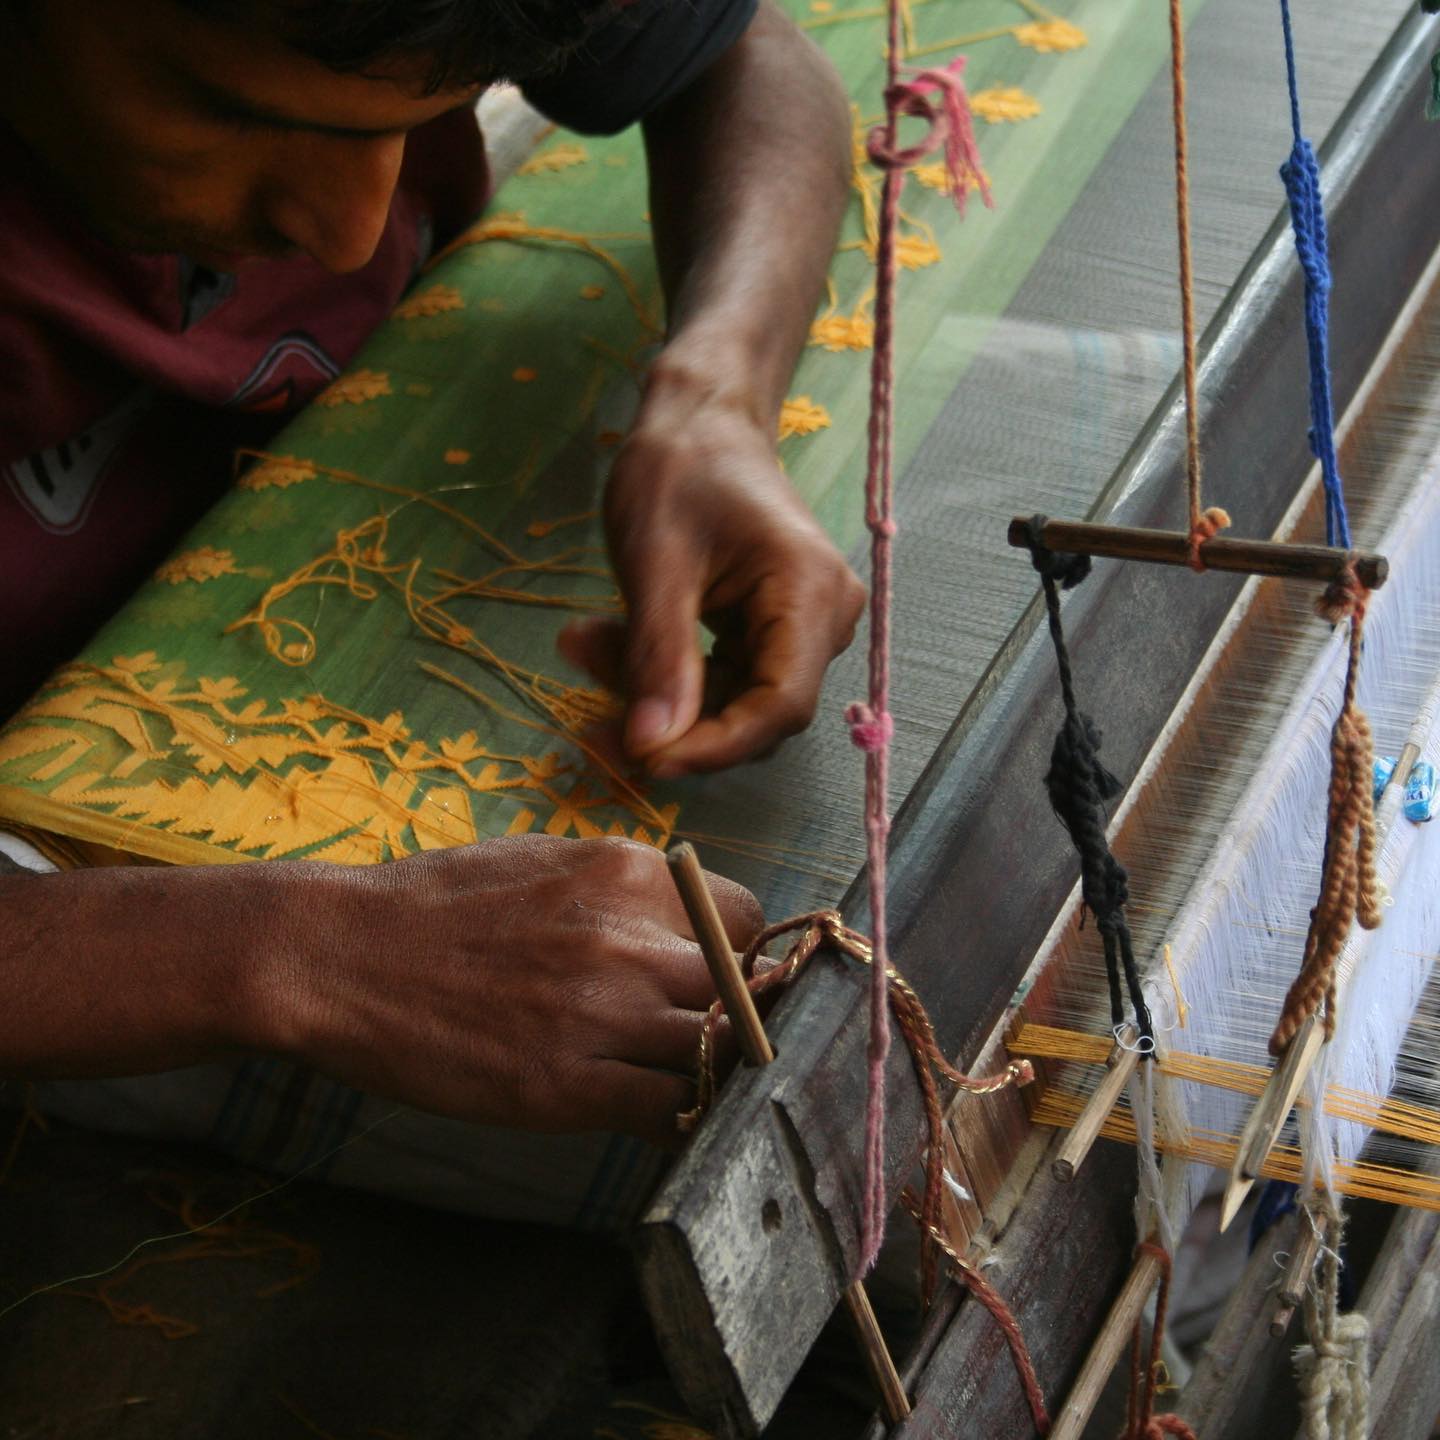 There are no visual reference for creating the motifs for #jamdani . The master craftsmen recites the designs as “buli” orally from his memories. The ‘buli’ are handed down verbally and through practice and memorizing the designs are repeated every time. #uniquejamdani #jamdaniweaving #jamdanidesigns #dhakai #dhakaijamdani #jamdaniofbengal #jamdaniofdhaka #jamdaniofbangladesh #heritagetextile #handmade #culturalheritage #slowtextiles #artisansocial #jamdaniartisan #slowtextiles #ethicalfashion #wearlocal #supportlocalartisans #supportlocalcrafts #peopleplanetpurpose #madeinbangladesh #sustainableliving #sustainabletextiles